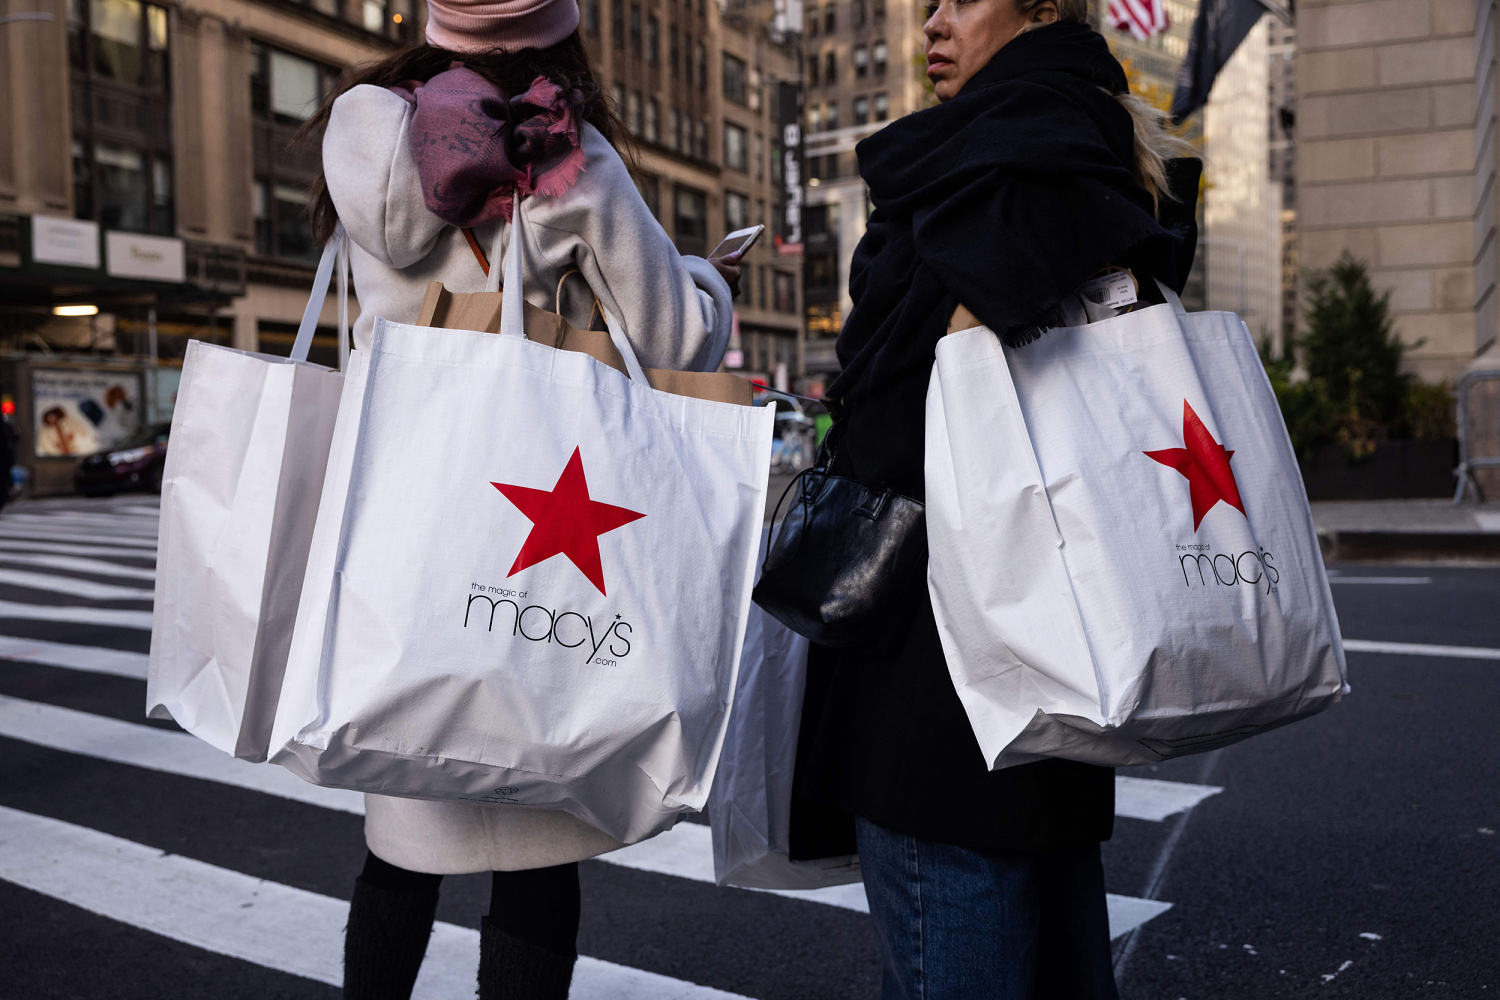 Consumer confidence pops in the last month of a year that dodged recession forecasts